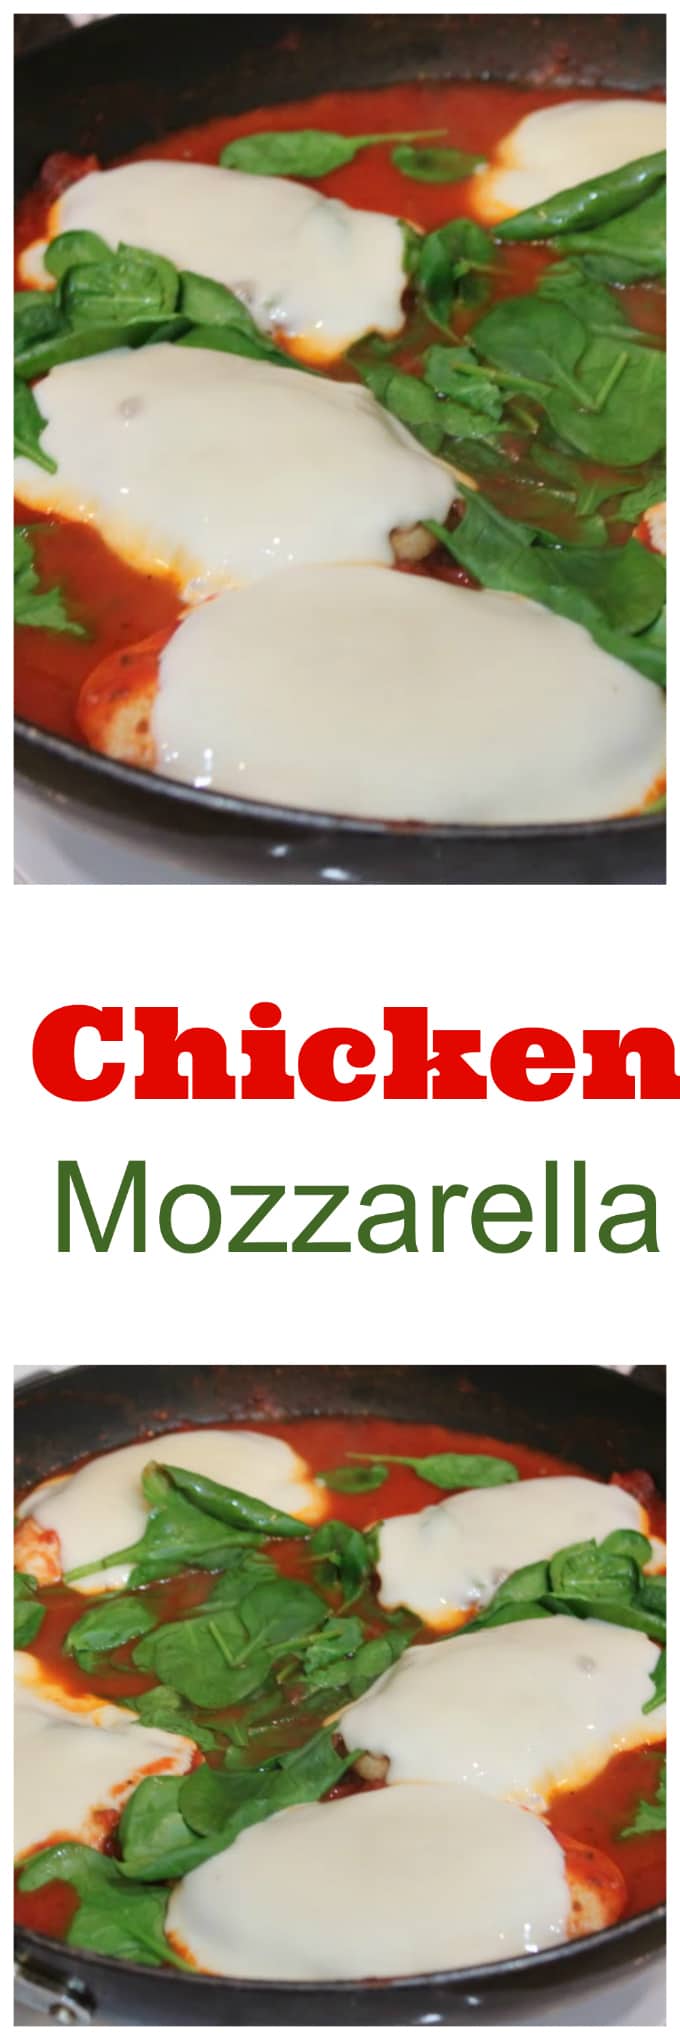 chicken mozzarella dinner is easy and delicious and great with pasta @createdbydiane